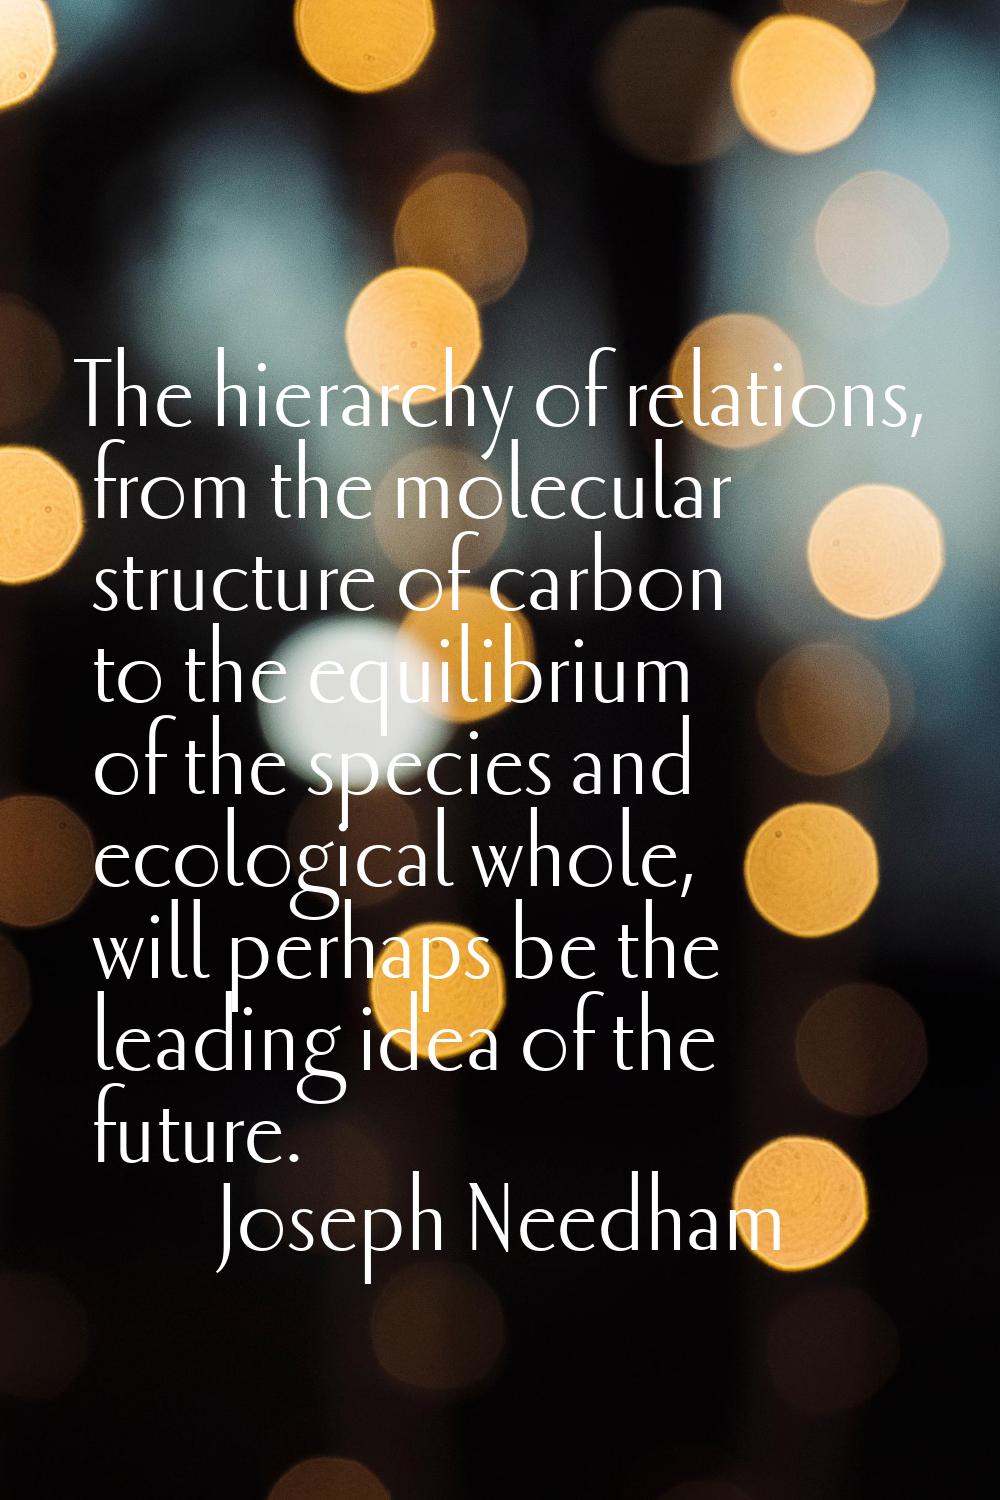 The hierarchy of relations, from the molecular structure of carbon to the equilibrium of the specie